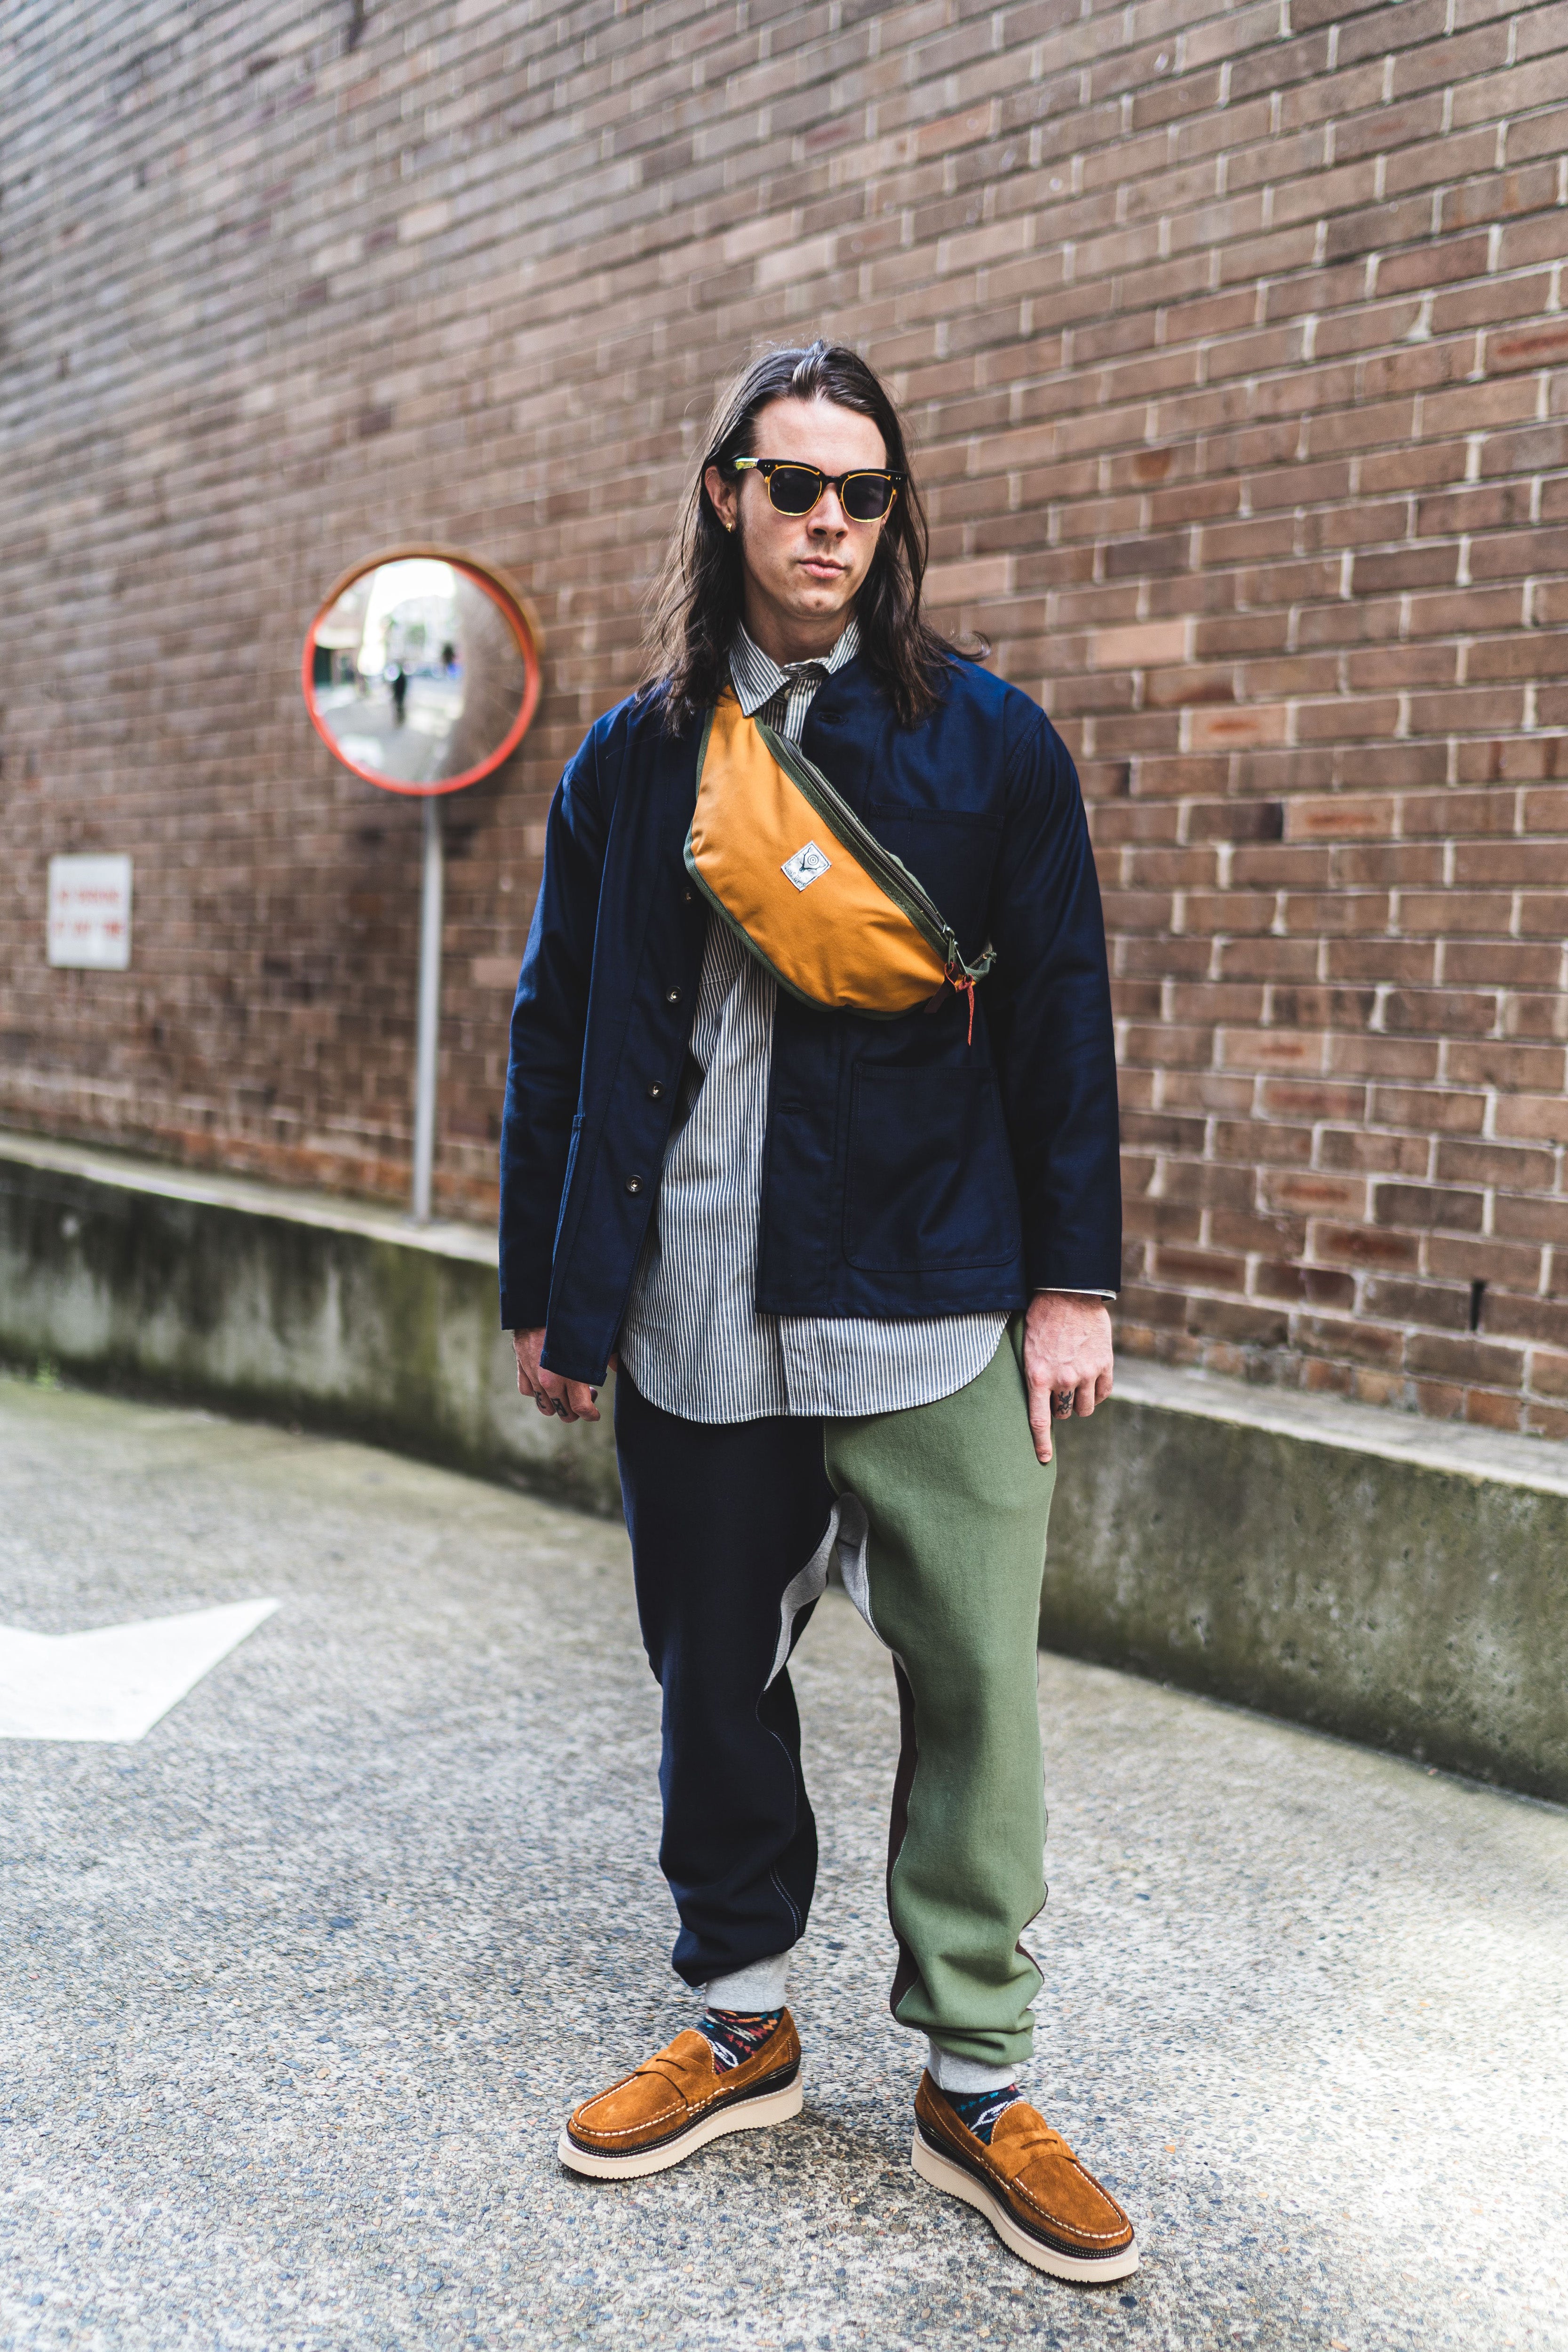 Workaday: by Engineered Garments